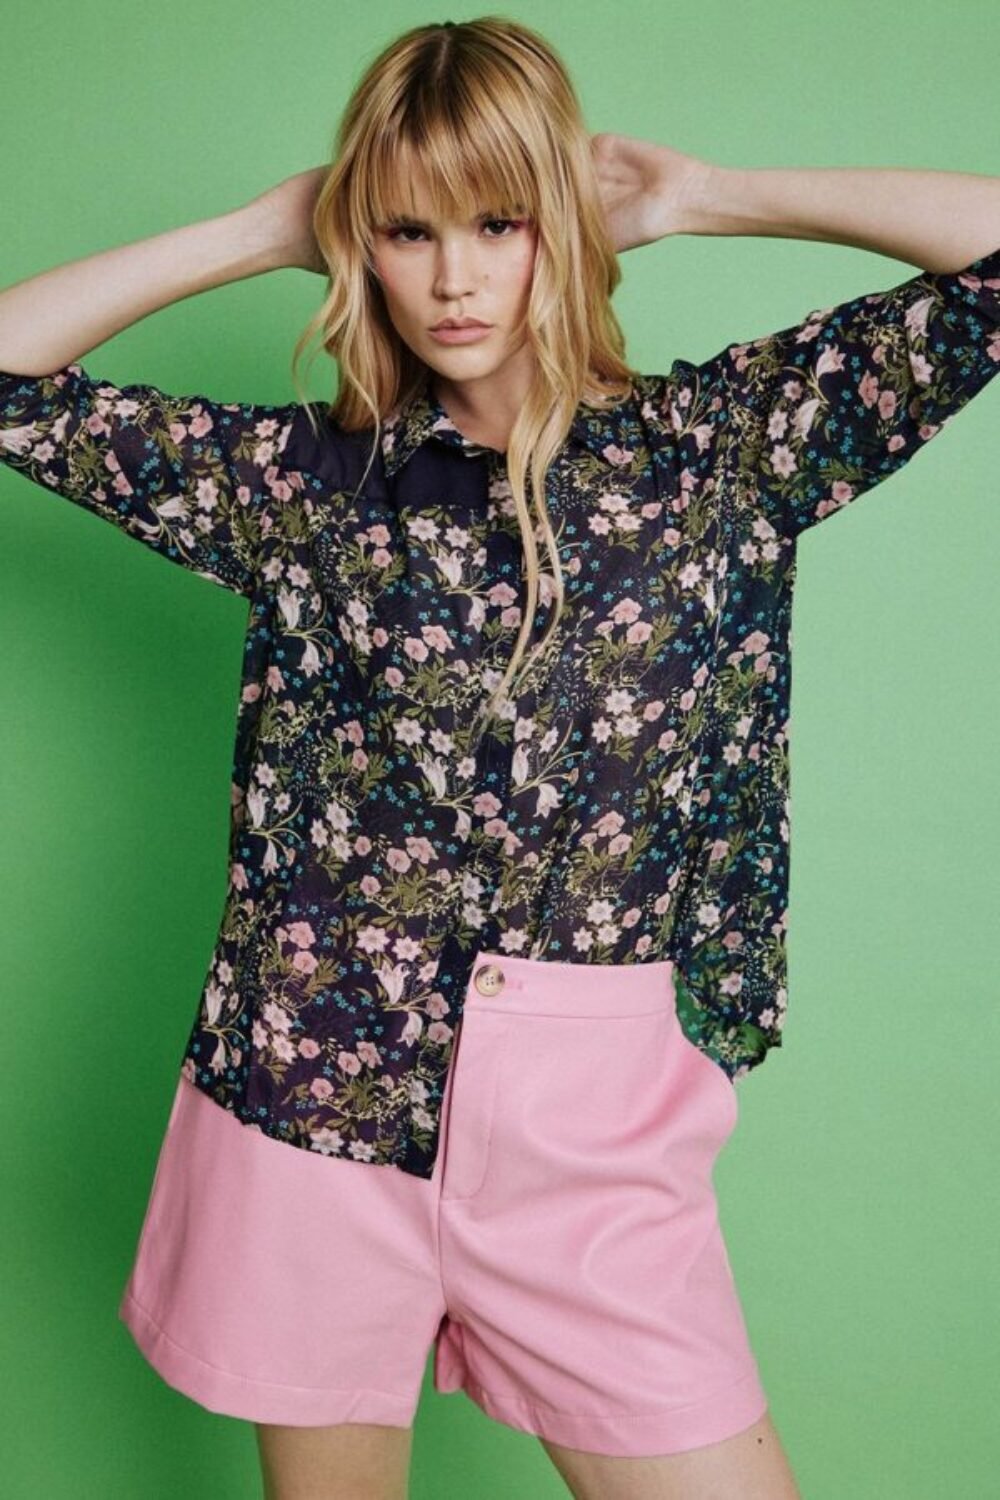 Shop Lux Navy Silk Blend Floral Shirt and women's luxury and designer clothes at www.lux-apparel.co.uk